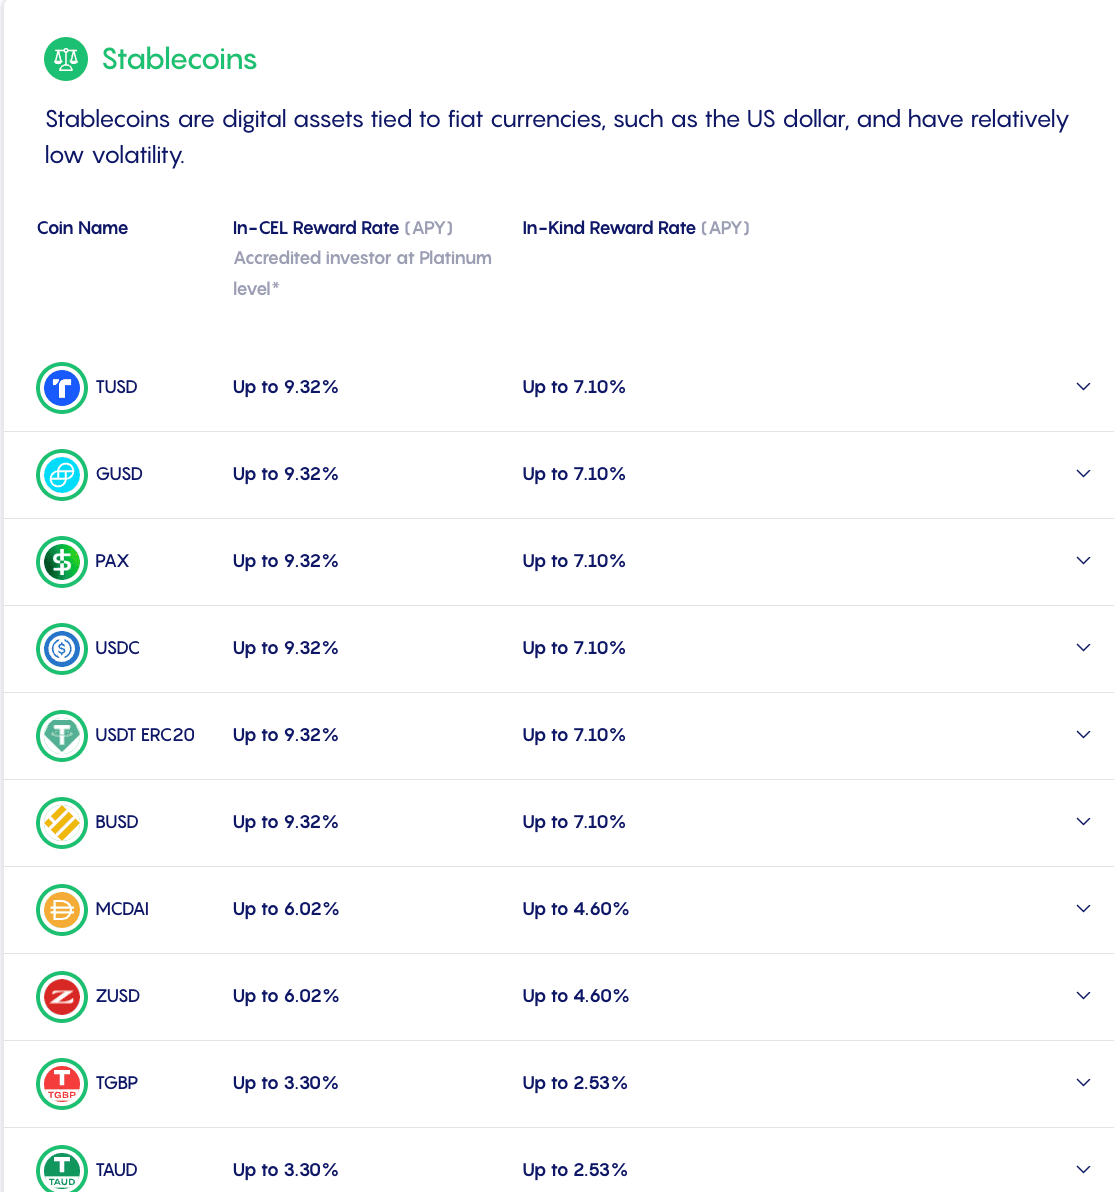 Celsius Network's stablecoin rates (source: https://celsius.network/earn)